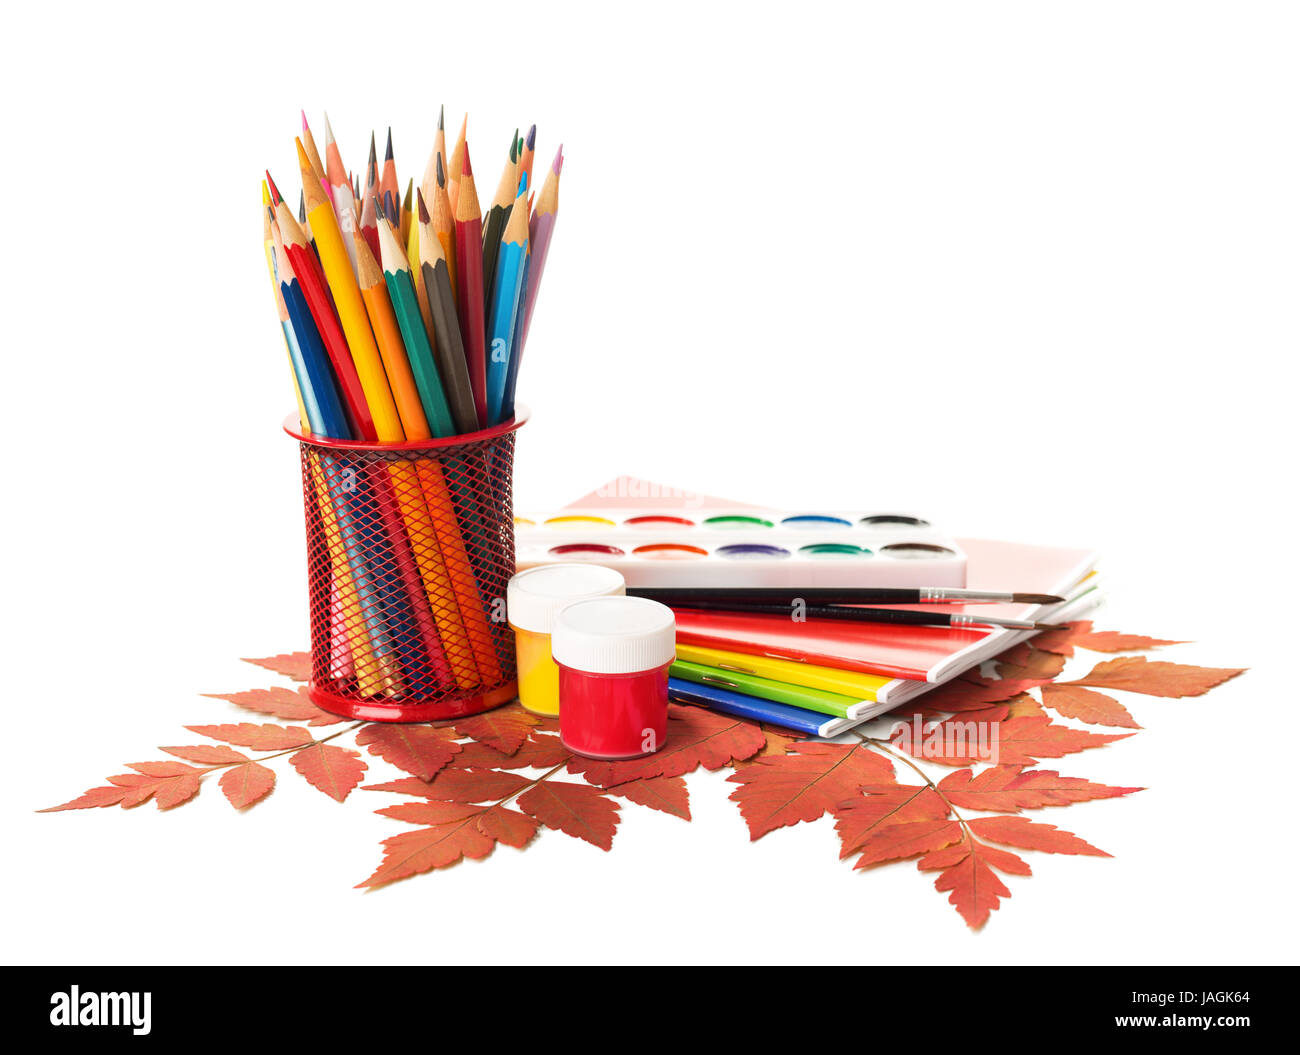 School equipment with pencils, paints , brushes and  autumn leaves  isolated on white.  Back to school concept. School stationery Stock Photo